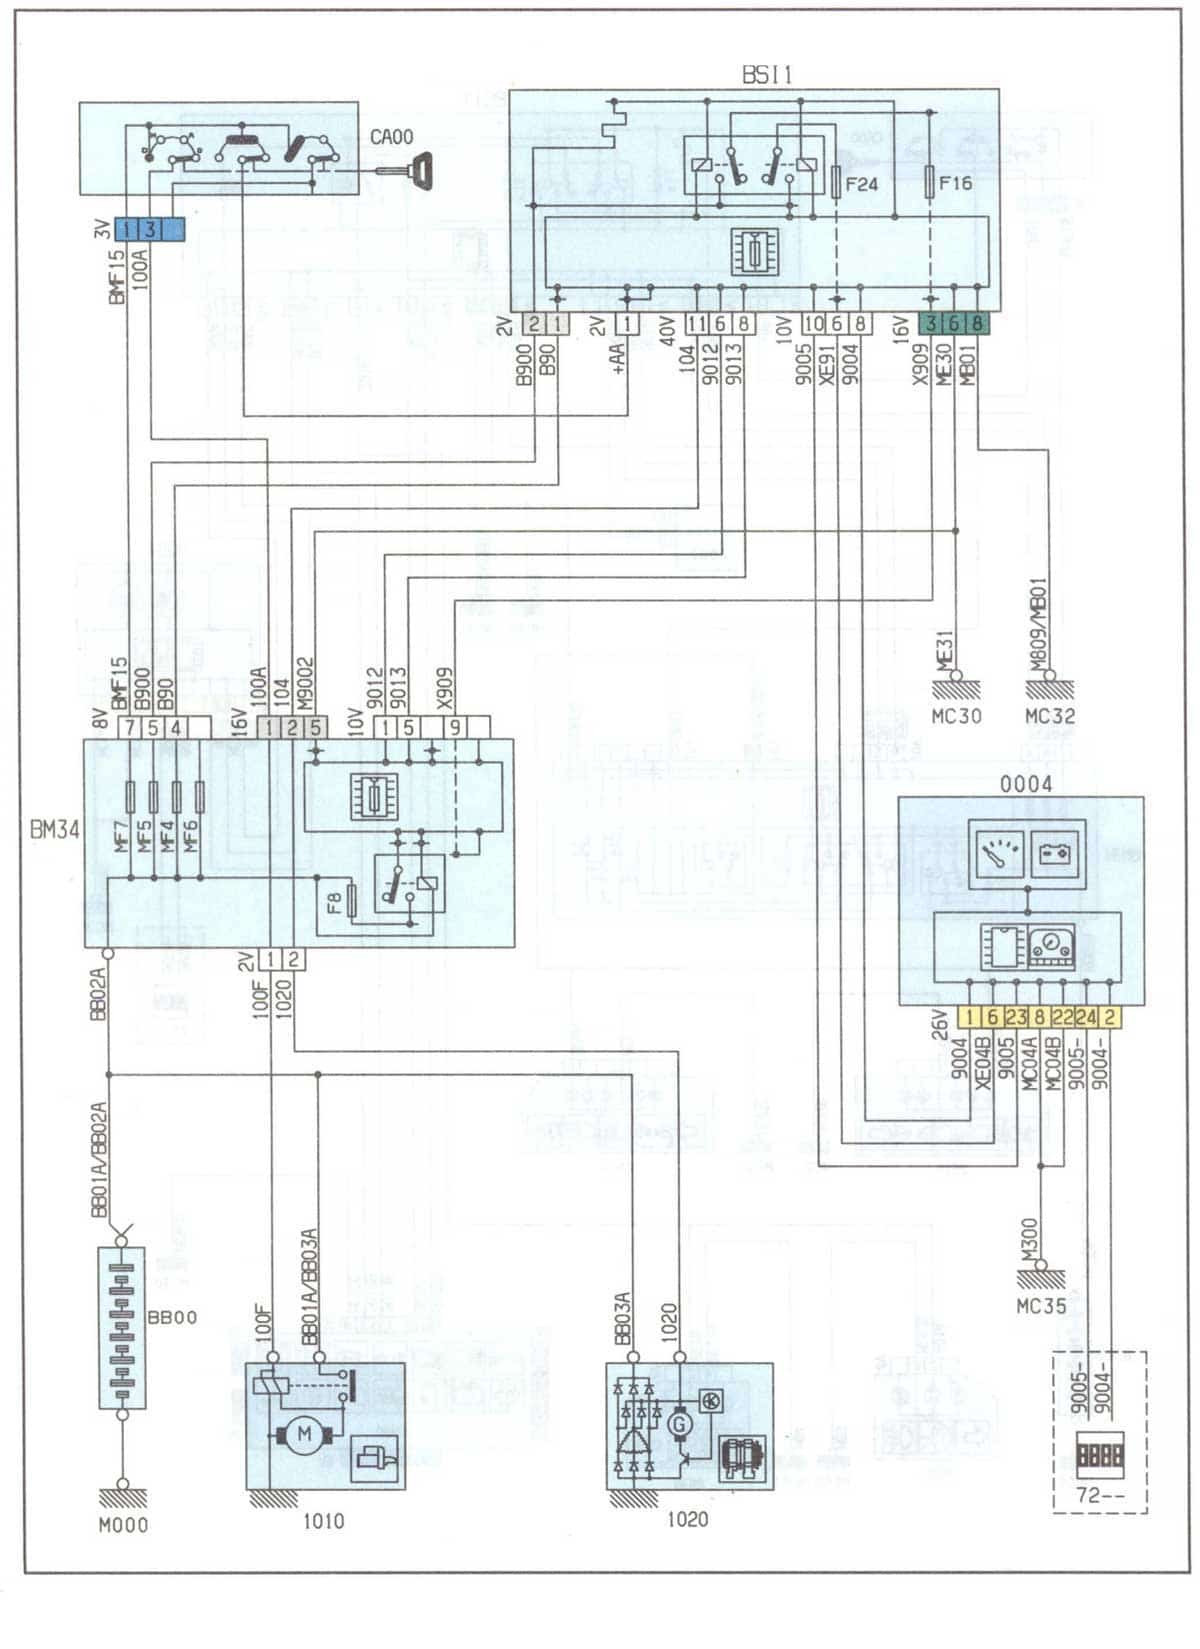 2002 Audi A4 Starter Wiring Diagram In the Engine Citroen C5 Wiring Diagrams & Fuse Boxes – Car Electrical Wiring … Of 2002 Audi A4 Starter Wiring Diagram In the Engine